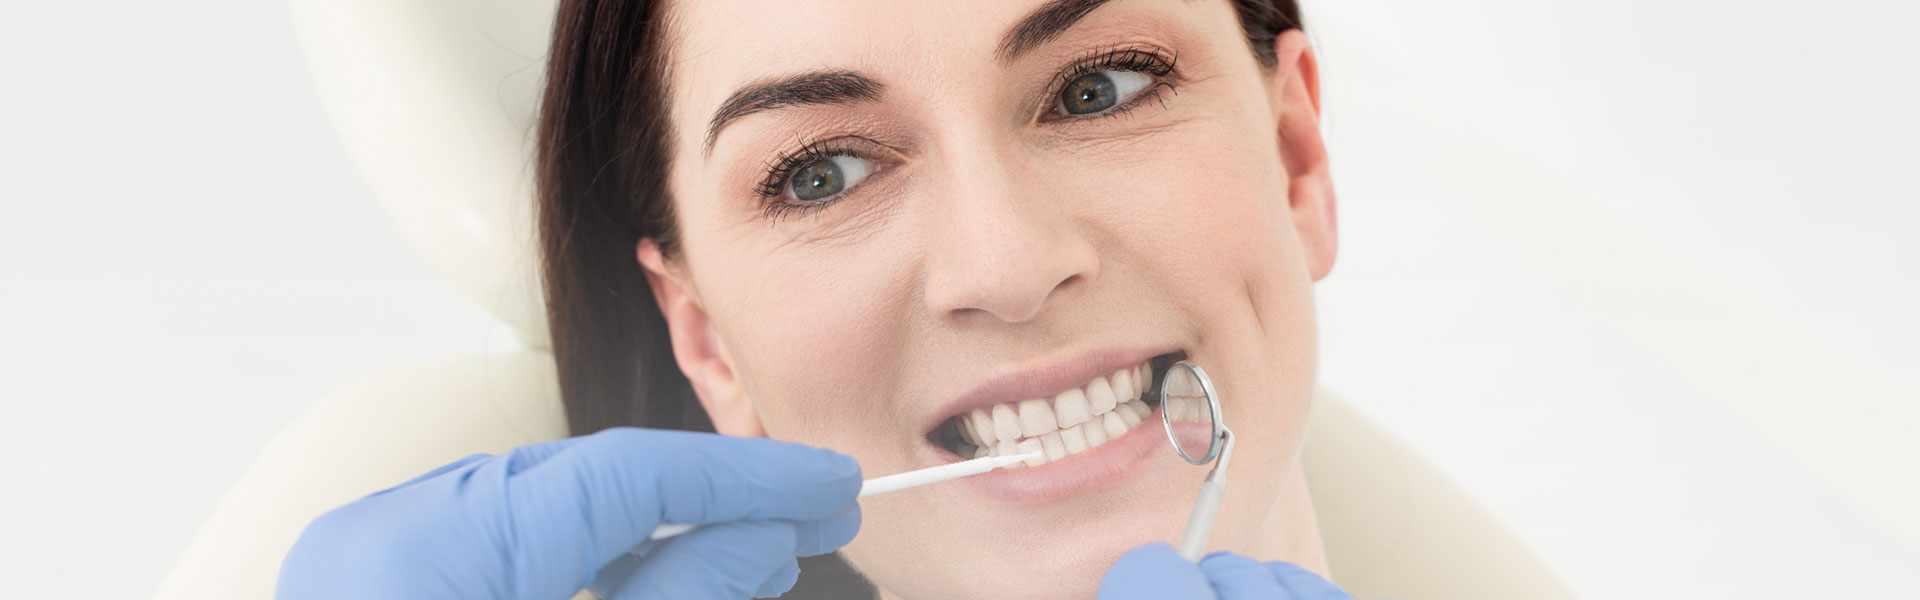 A woman is having dental cleanings treatment